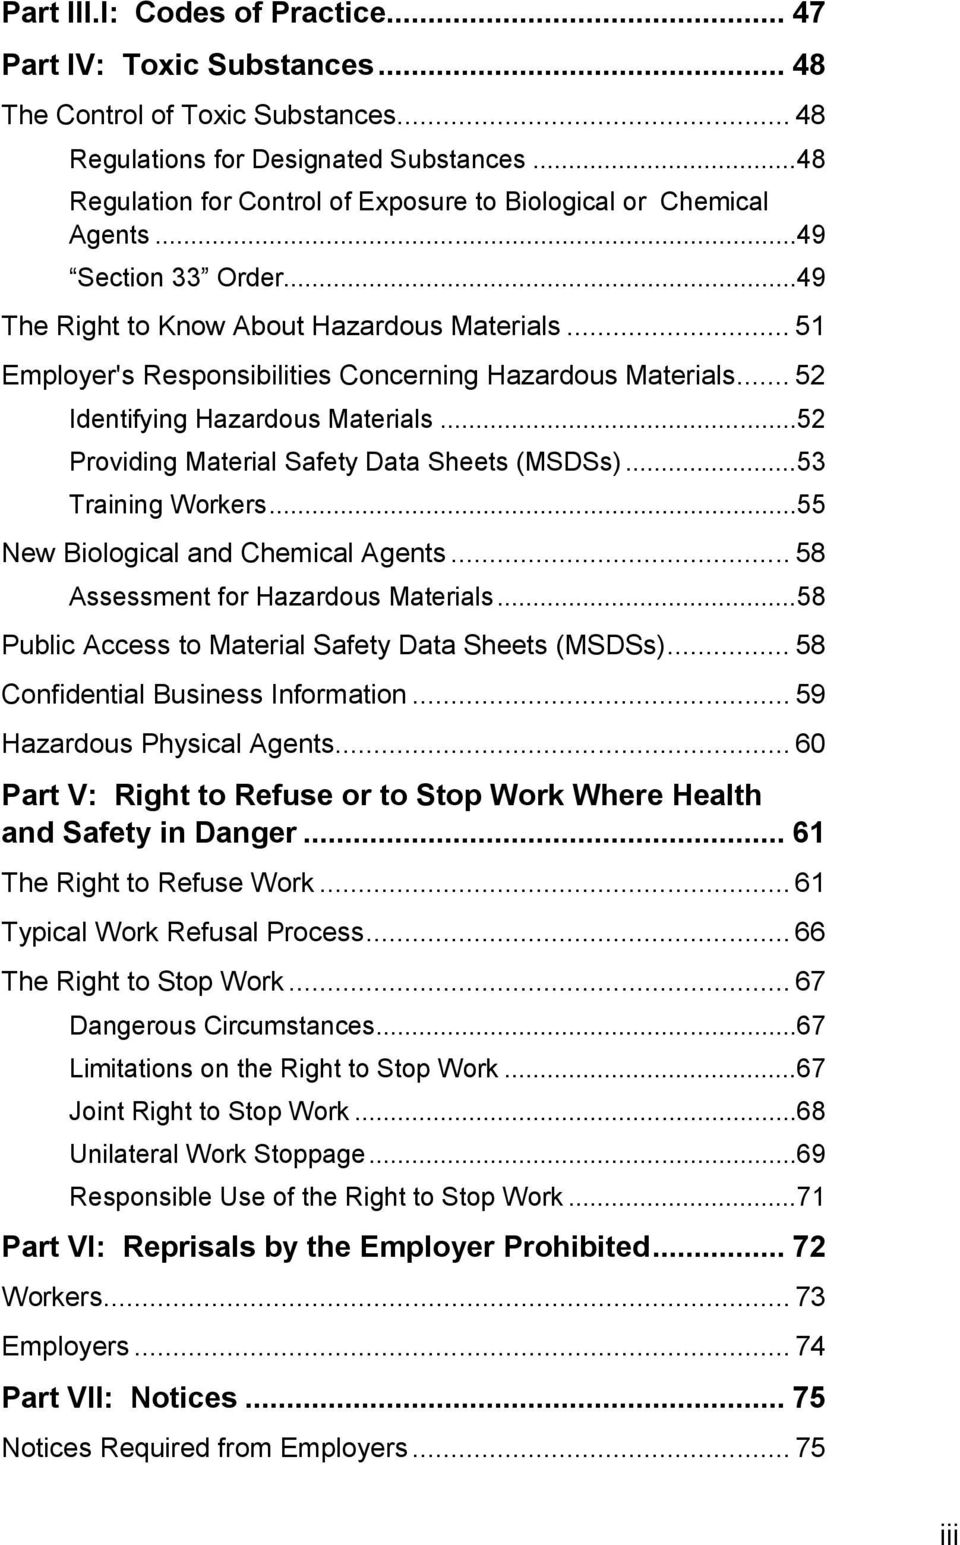 .. 51 Employer's Responsibilities Concerning Hazardous Materials... 52 Identifying Hazardous Materials... 52 Providing Material Safety Data Sheets (MSDSs)... 53 Training Workers.